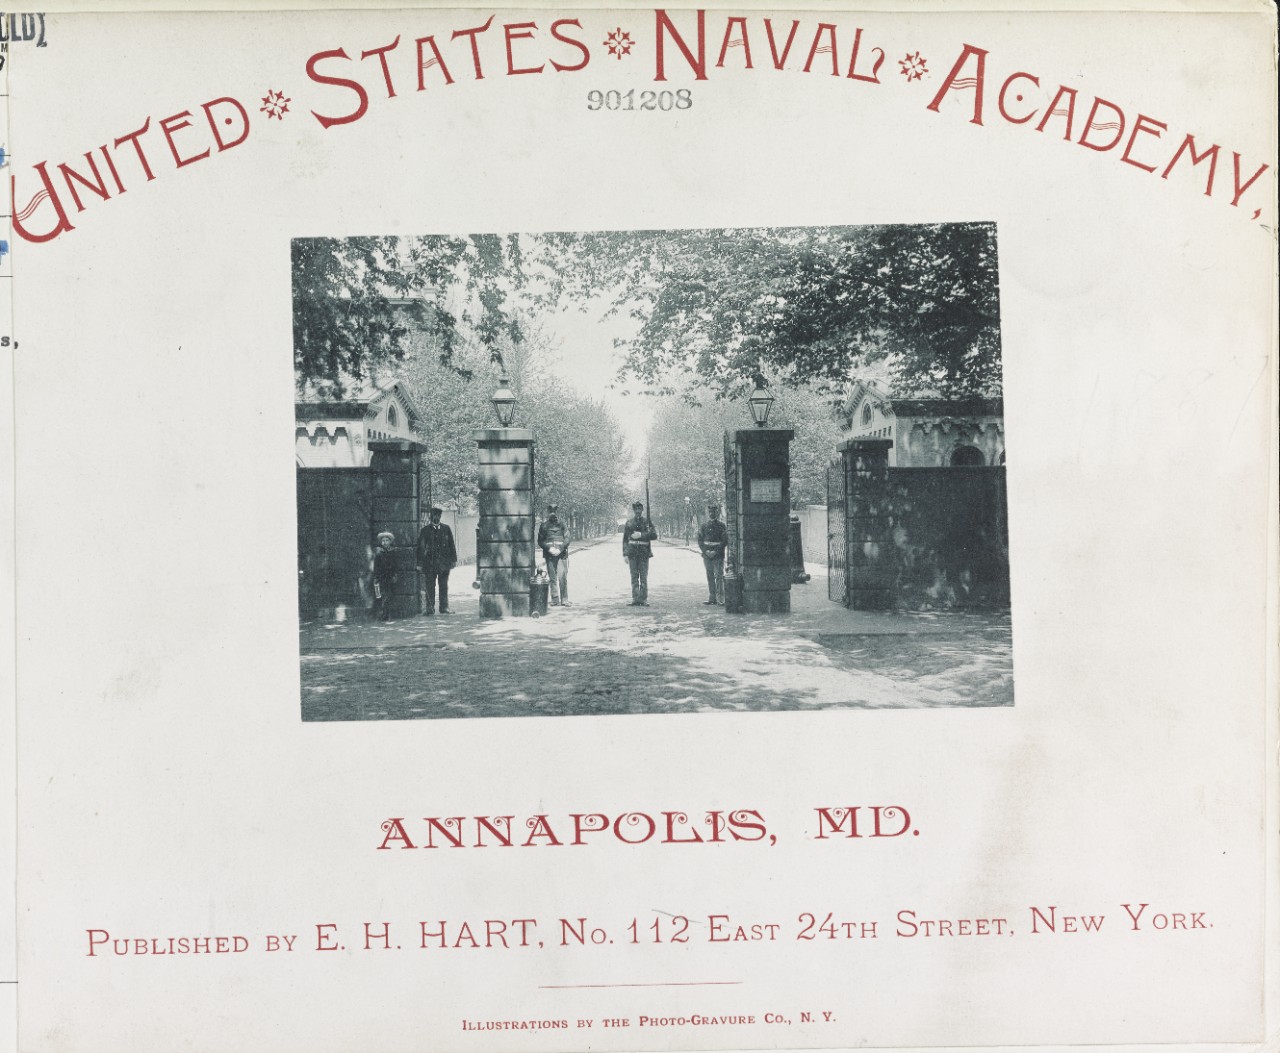 Main gate of the United States Naval Academy, Annapolis, Maryland, 1887.